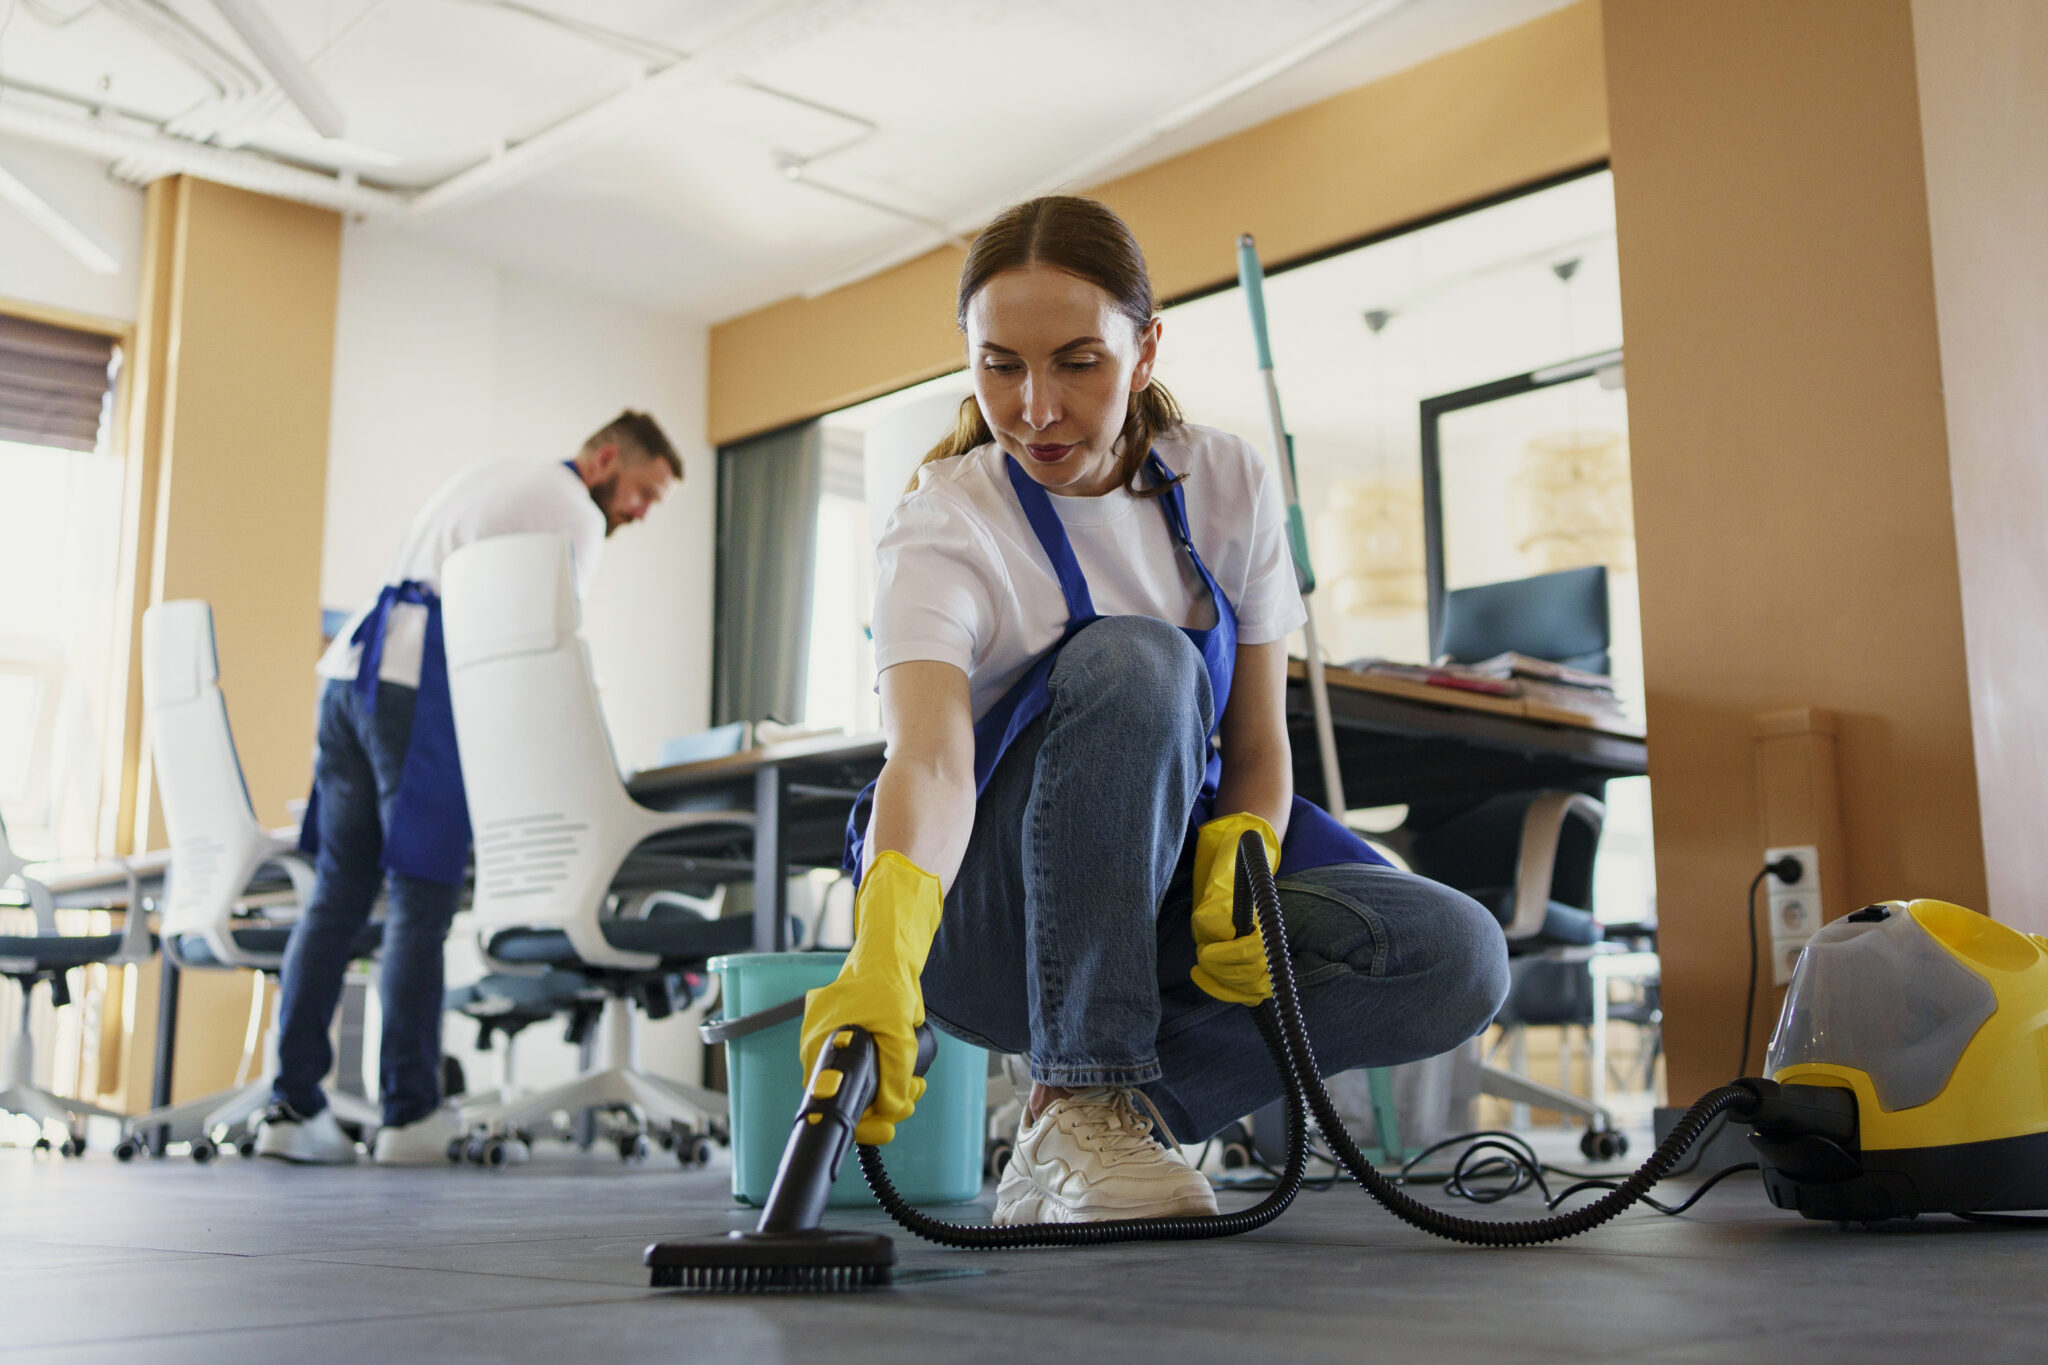 professional-cleaning-service-person-using-vacuum-cleaner-office (1)